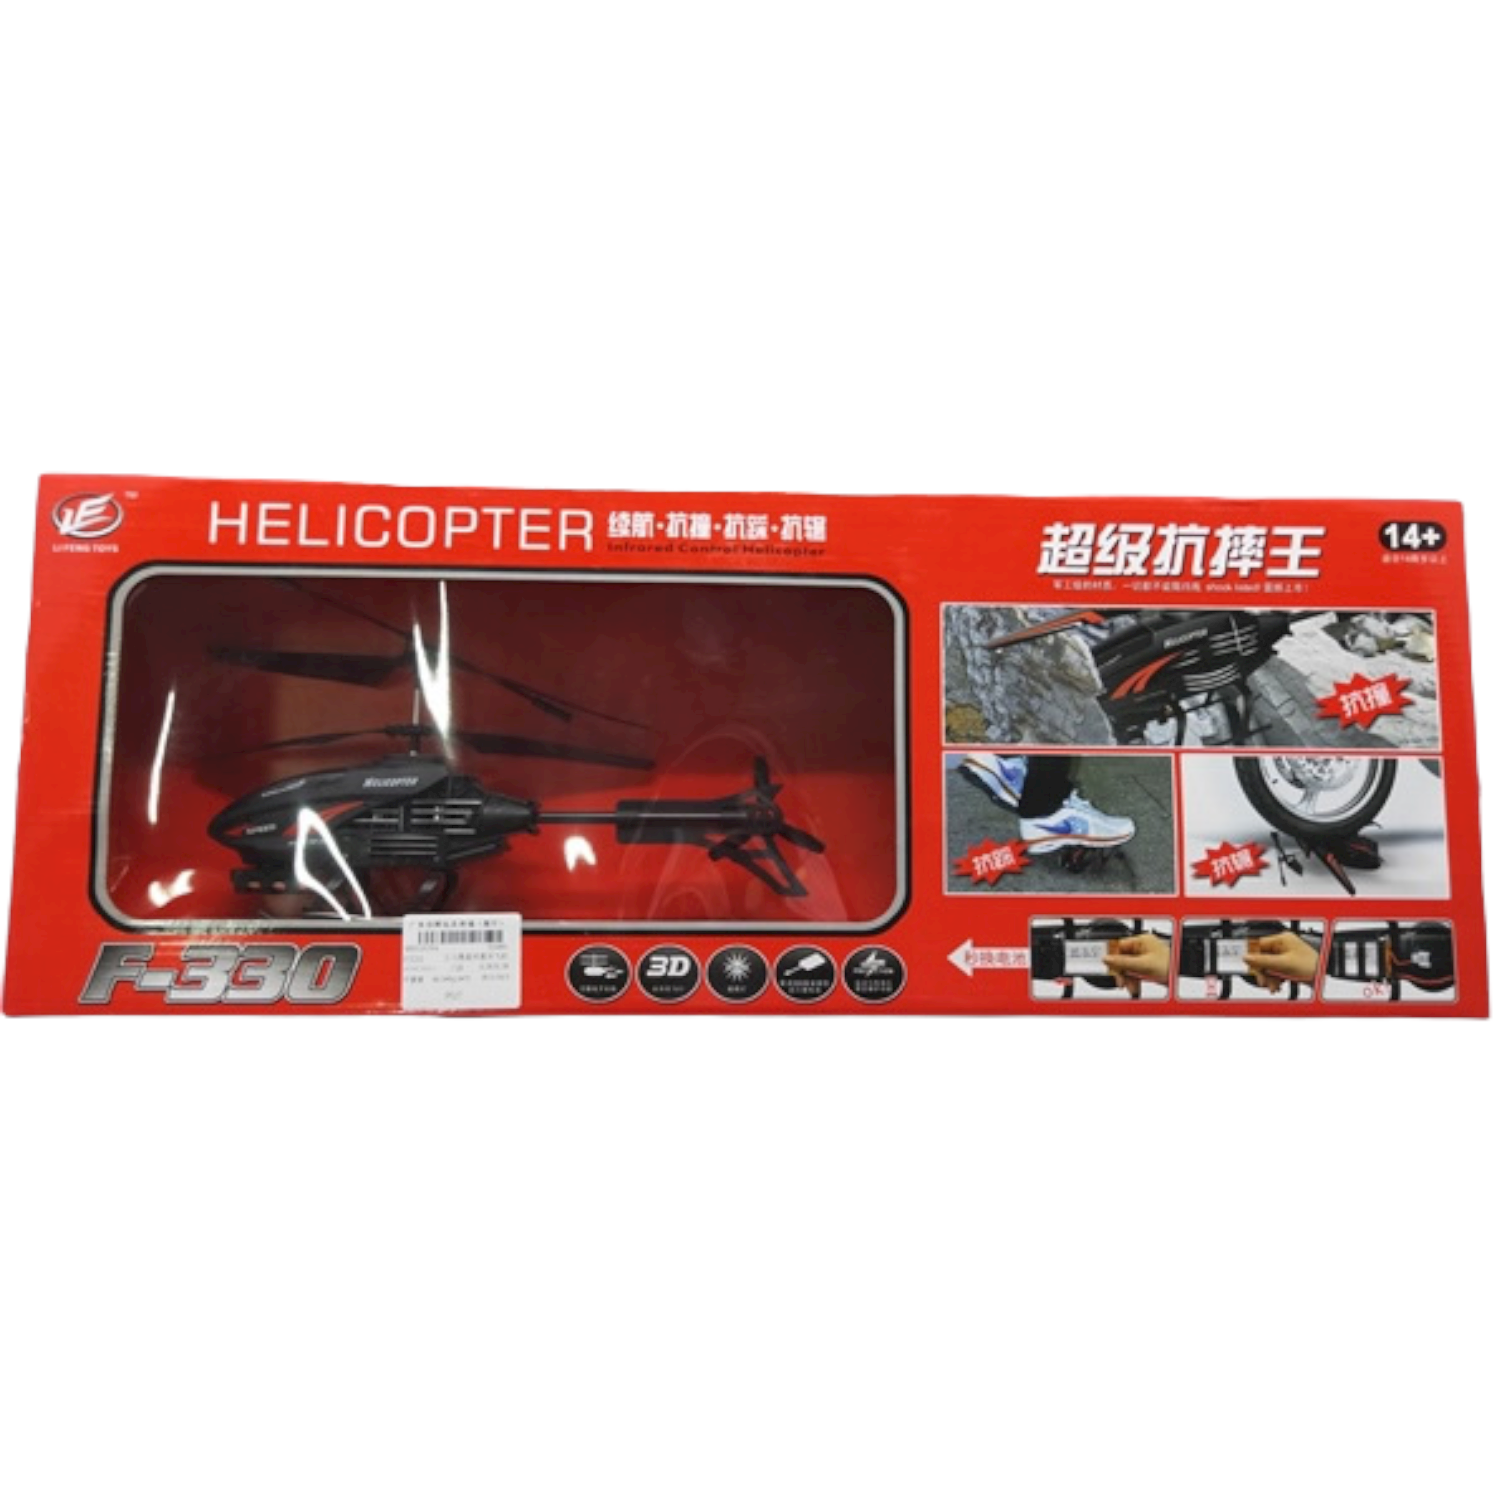 R/C Flying Helicopter - F330